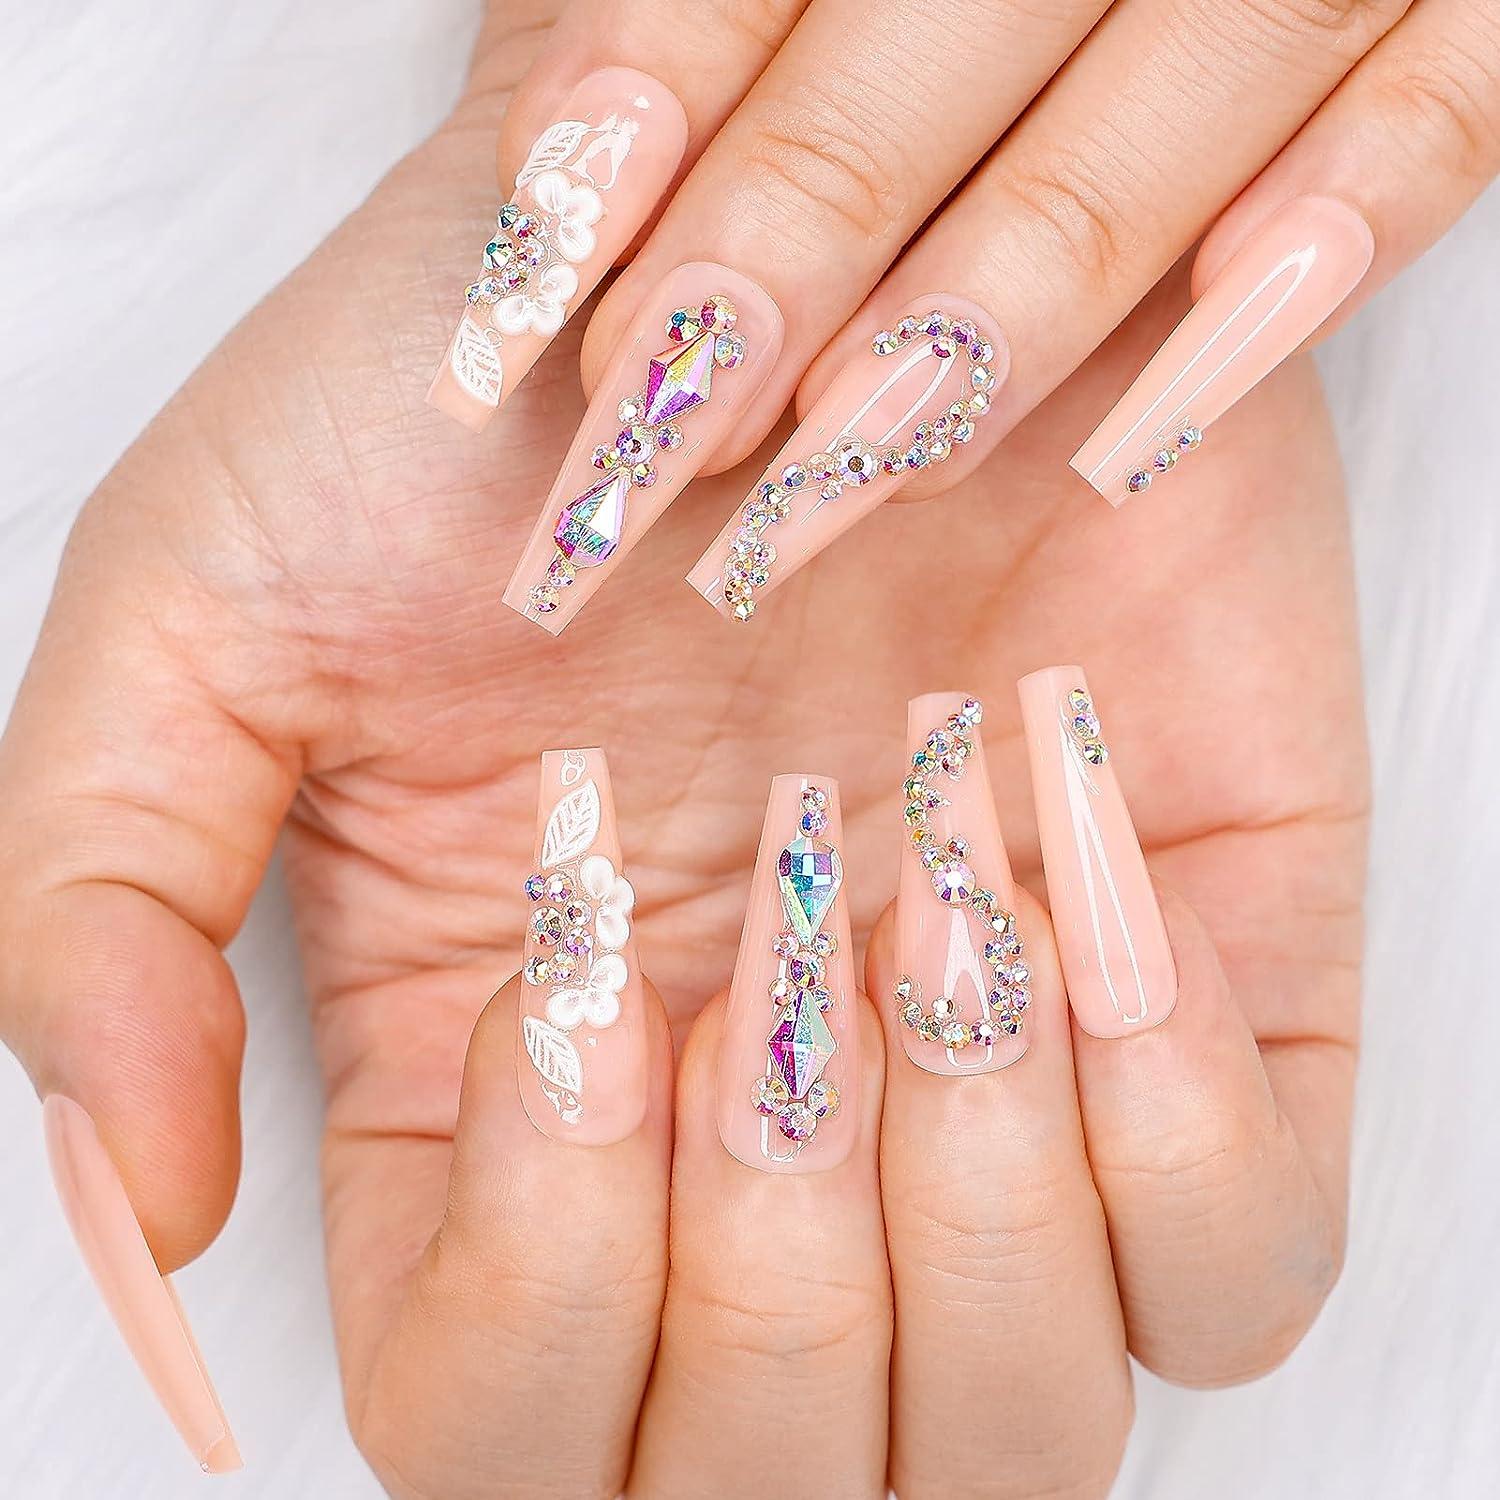 Artquee 24pcs Light Nude Pink Clear Press on Nails Long Ballerina Glossy  Fake Nail Art Luxury 3D Flower With Rhinestones Coffin False Tips  Artificial Manicure Stick for Women and Girls Decoration Light